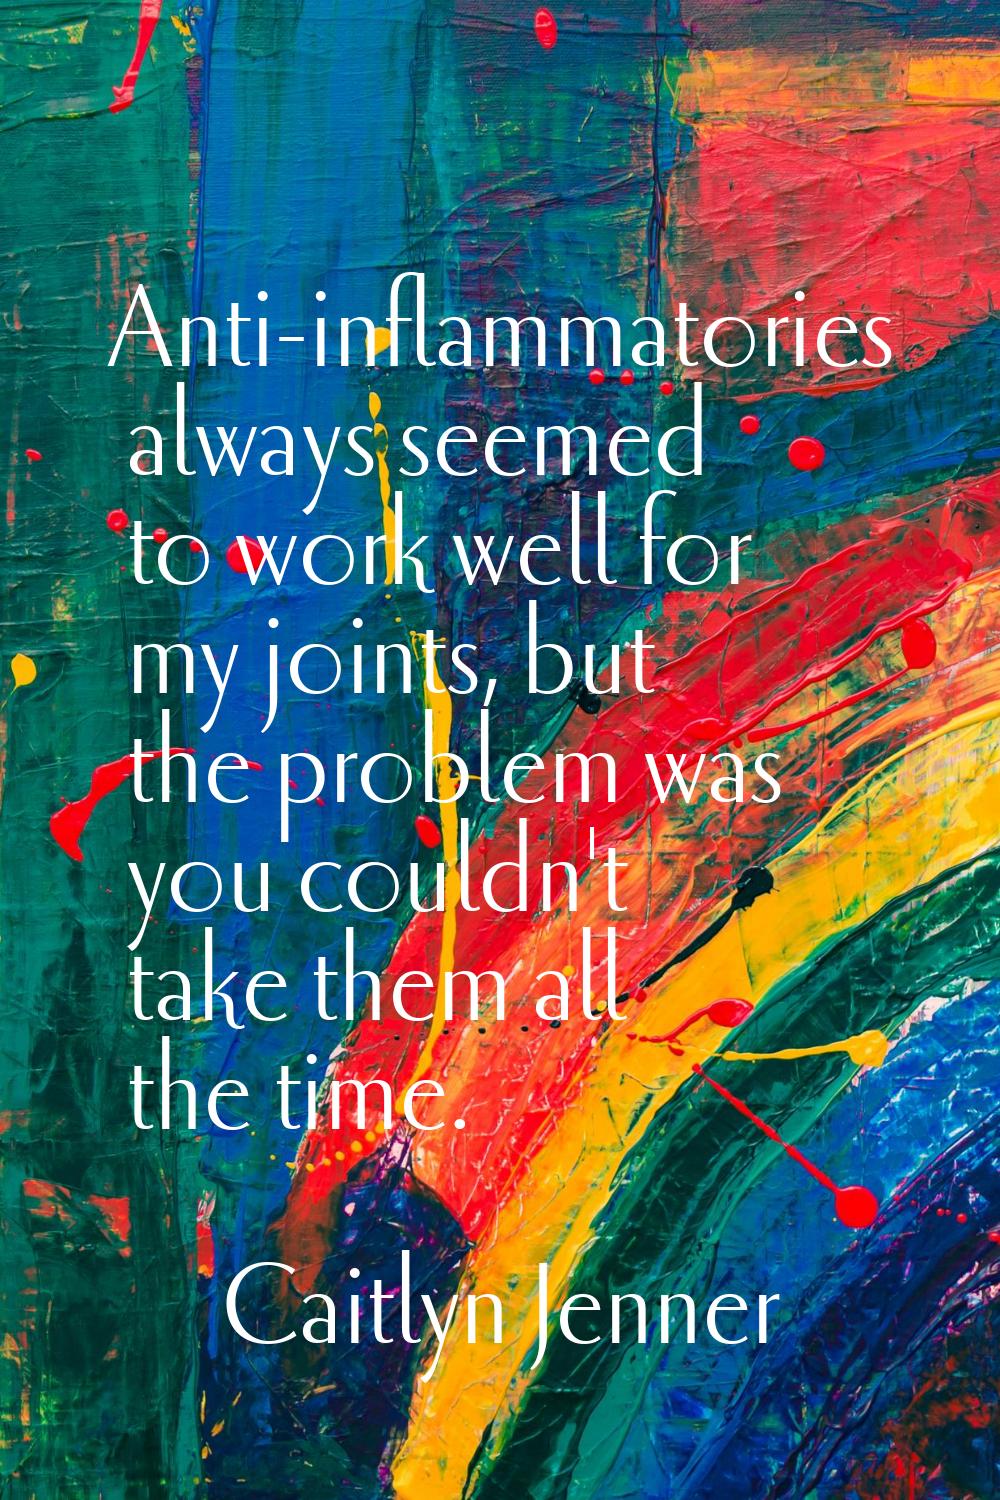 Anti-inflammatories always seemed to work well for my joints, but the problem was you couldn't take